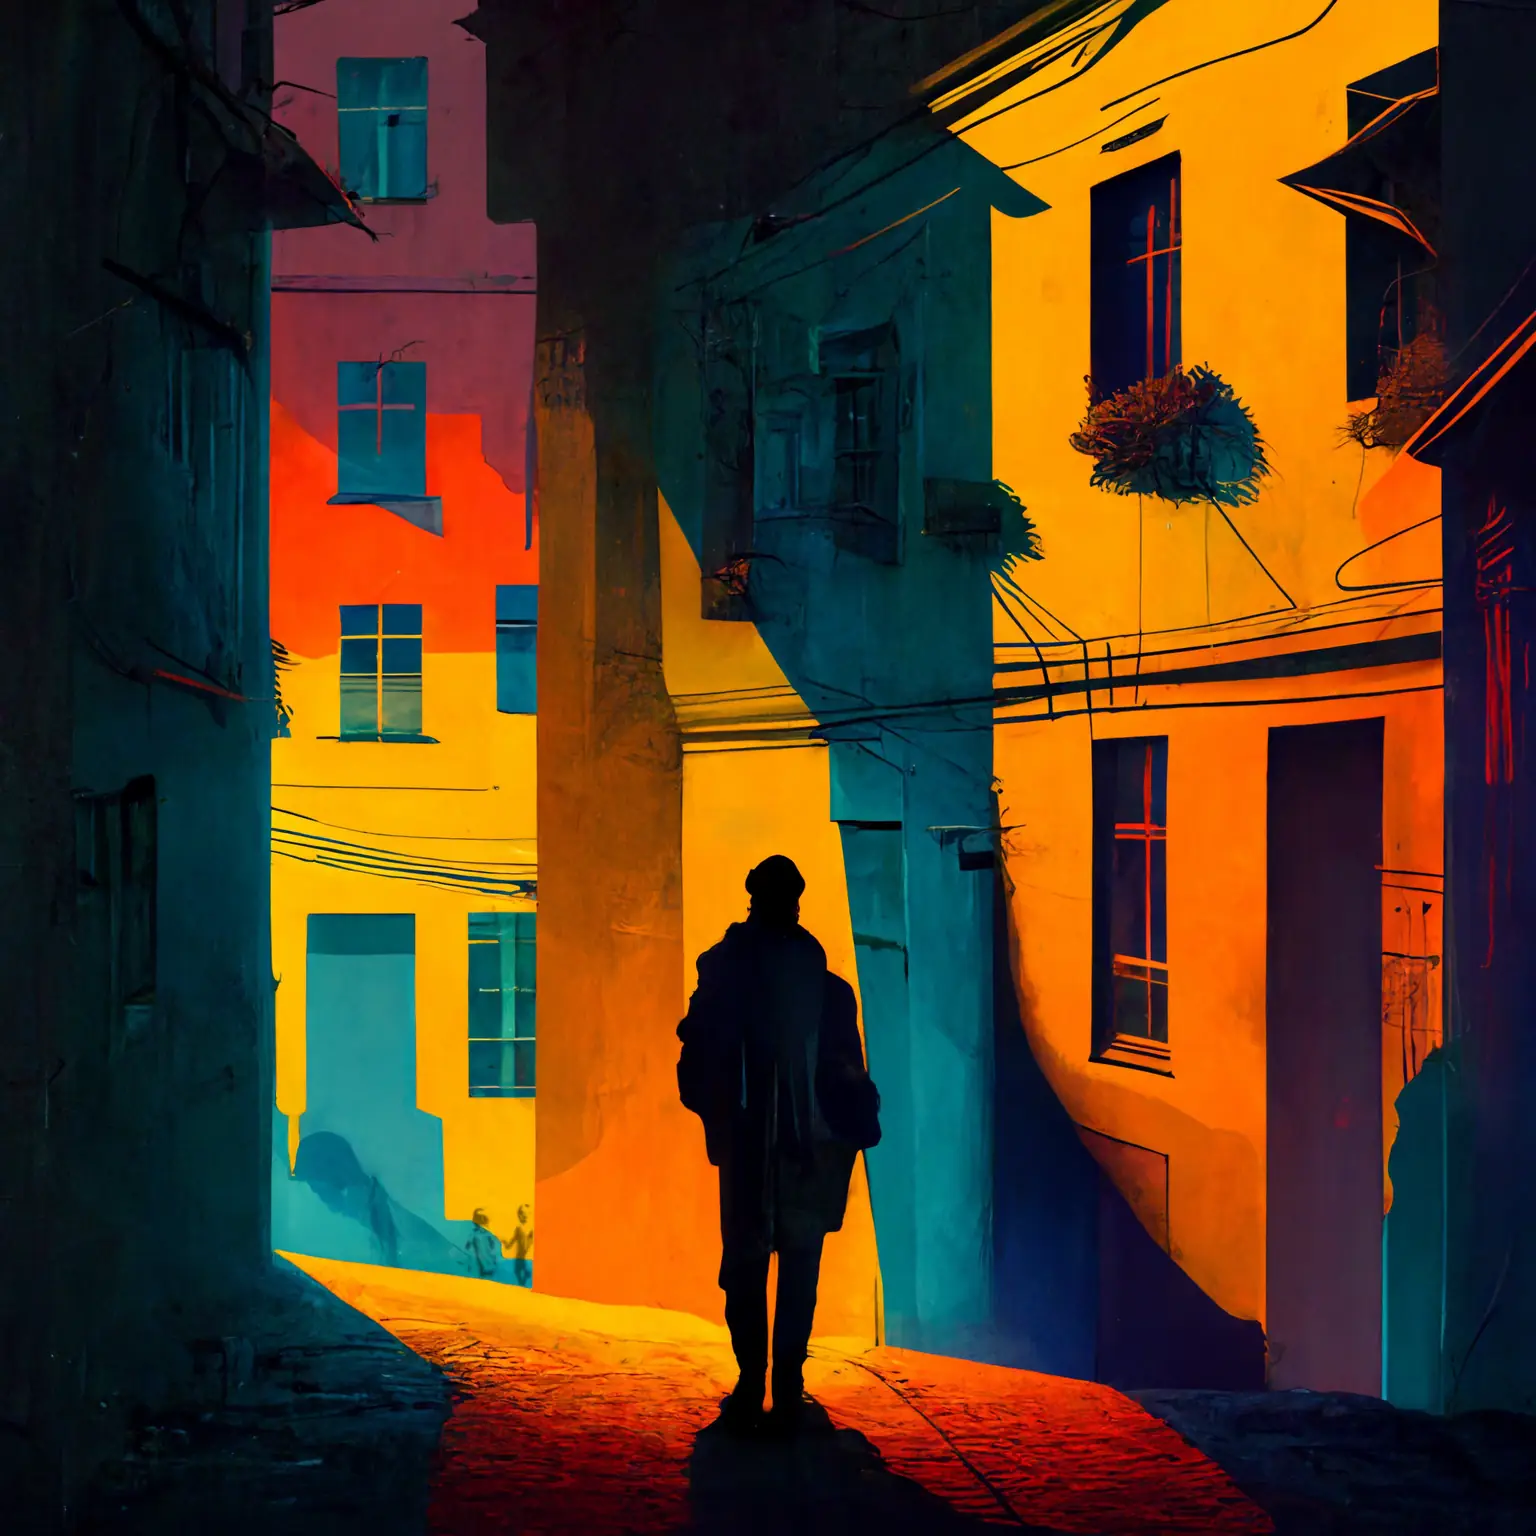 An artistic rendering of a figure in shadow walking towards the light on an old hilly cobblestone path between buildings, in a European like town.